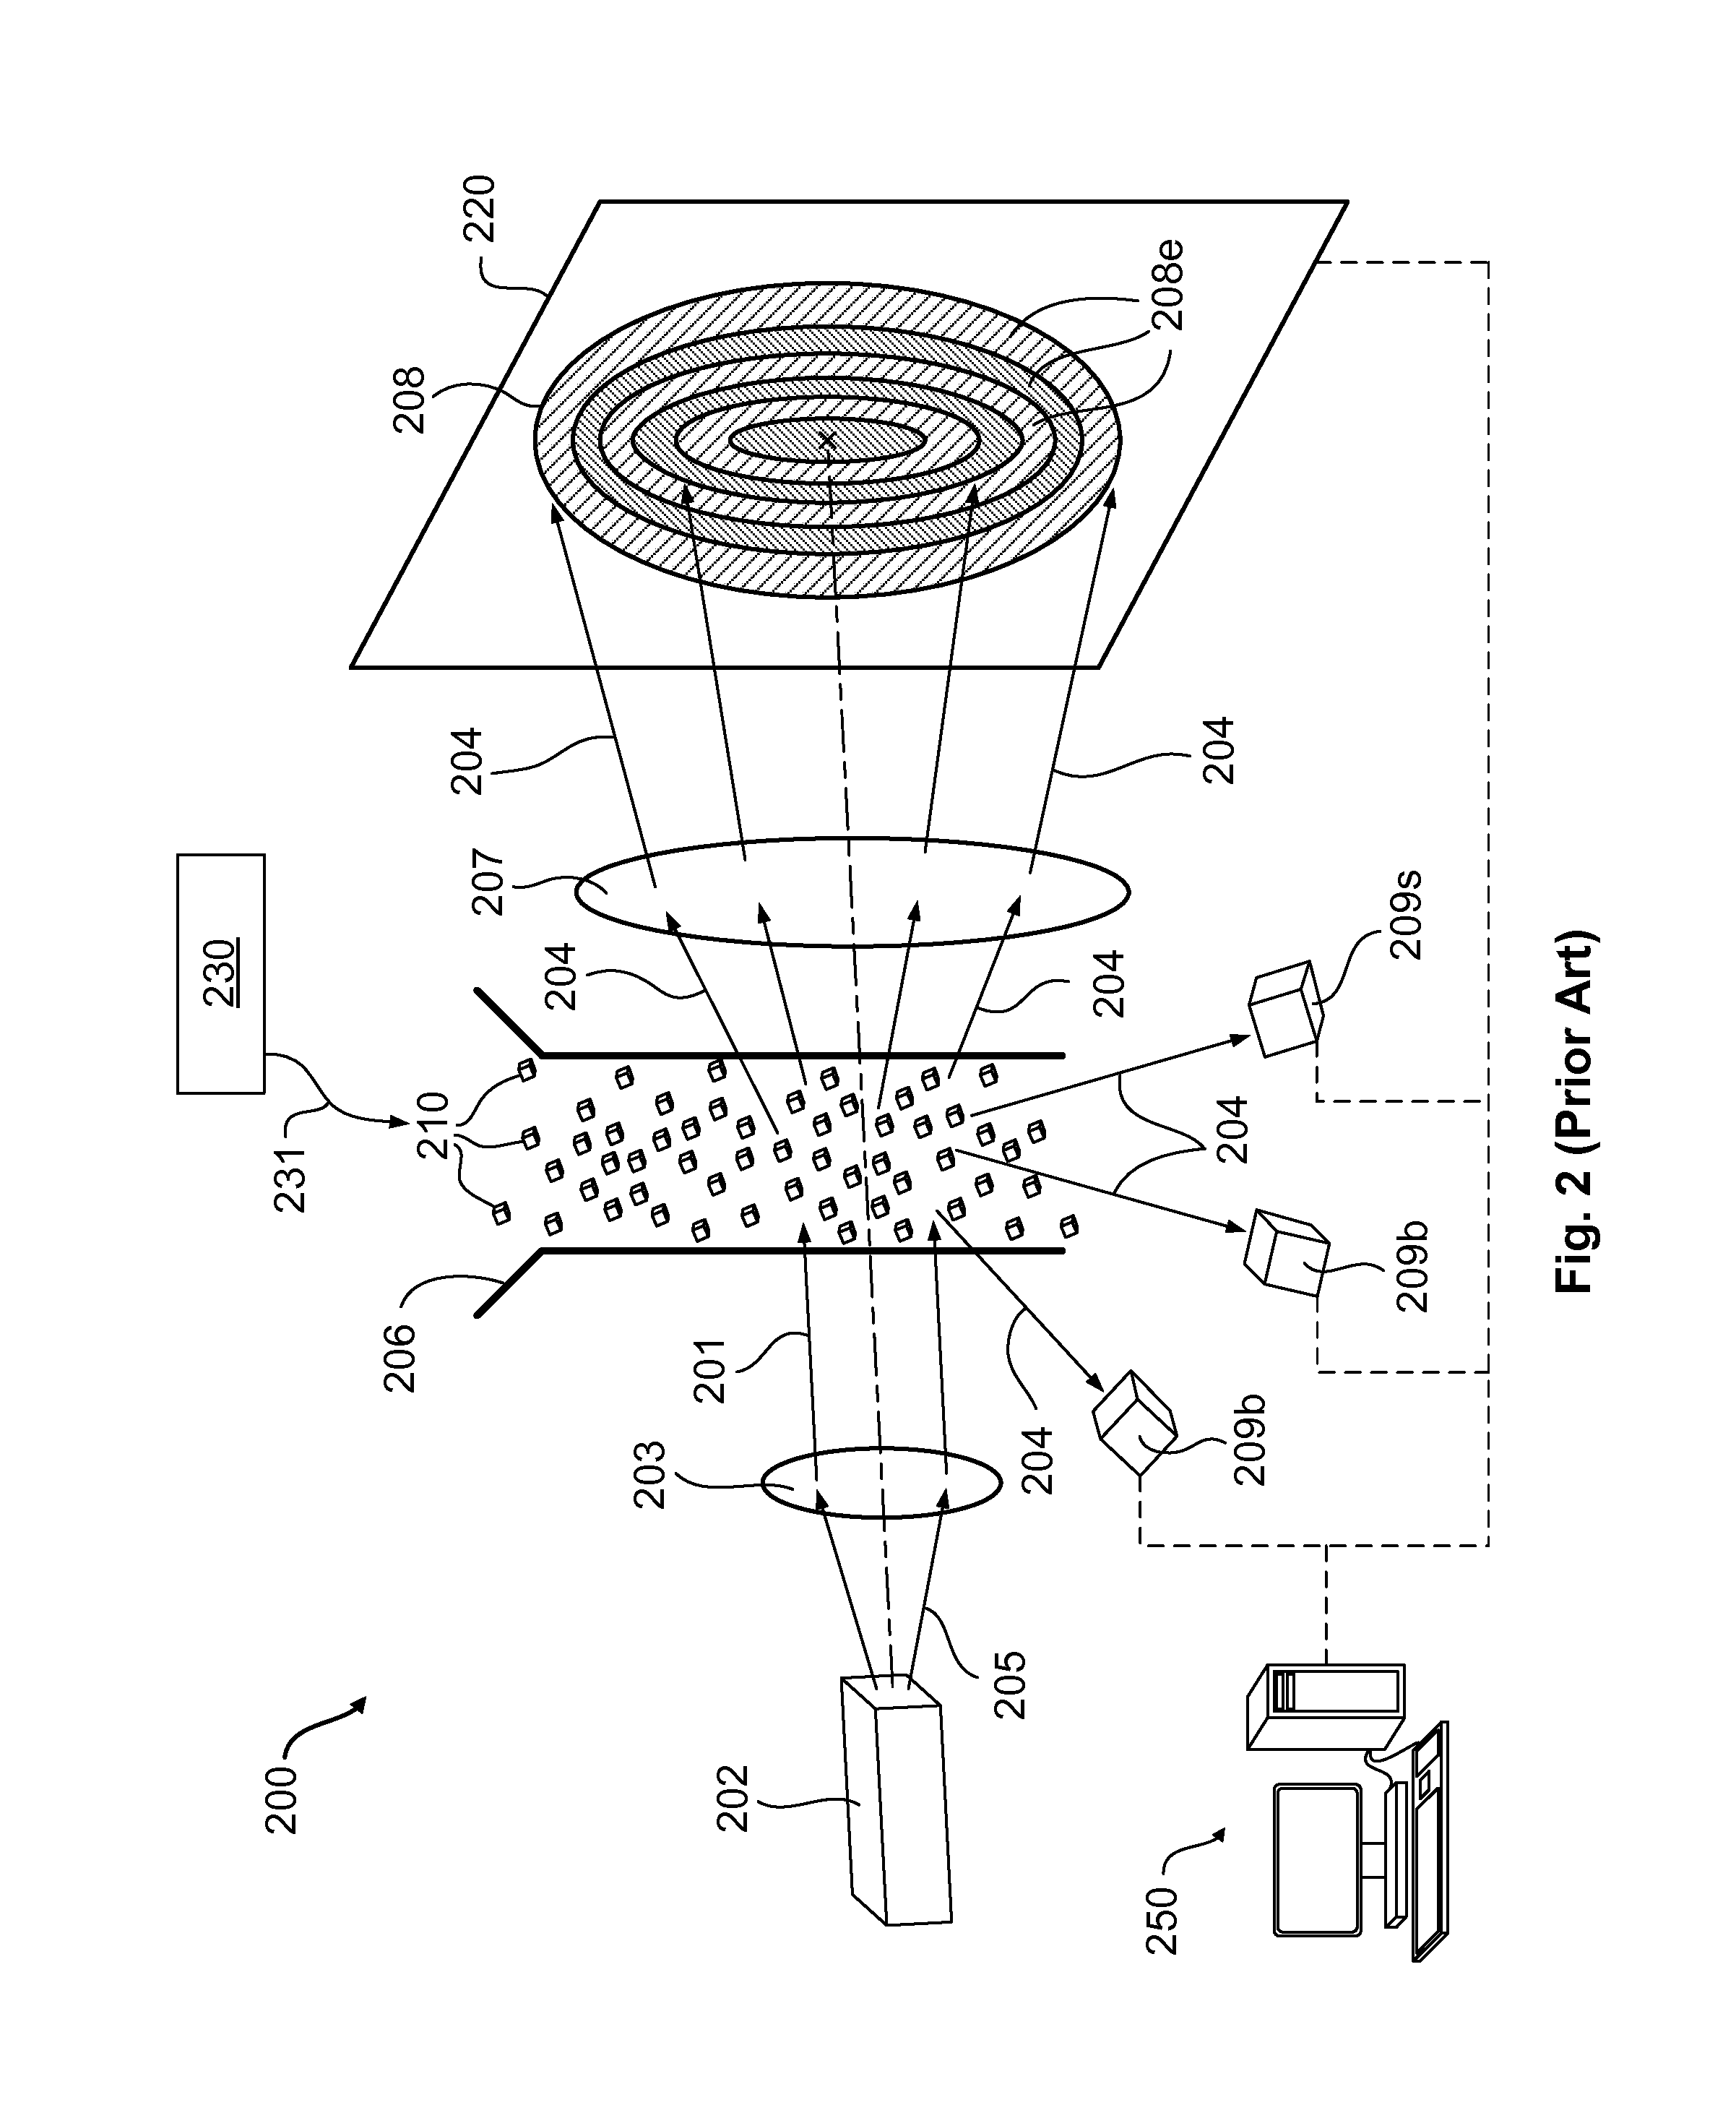 Systems and methods for determining specific gravity and minerological properties of a particle